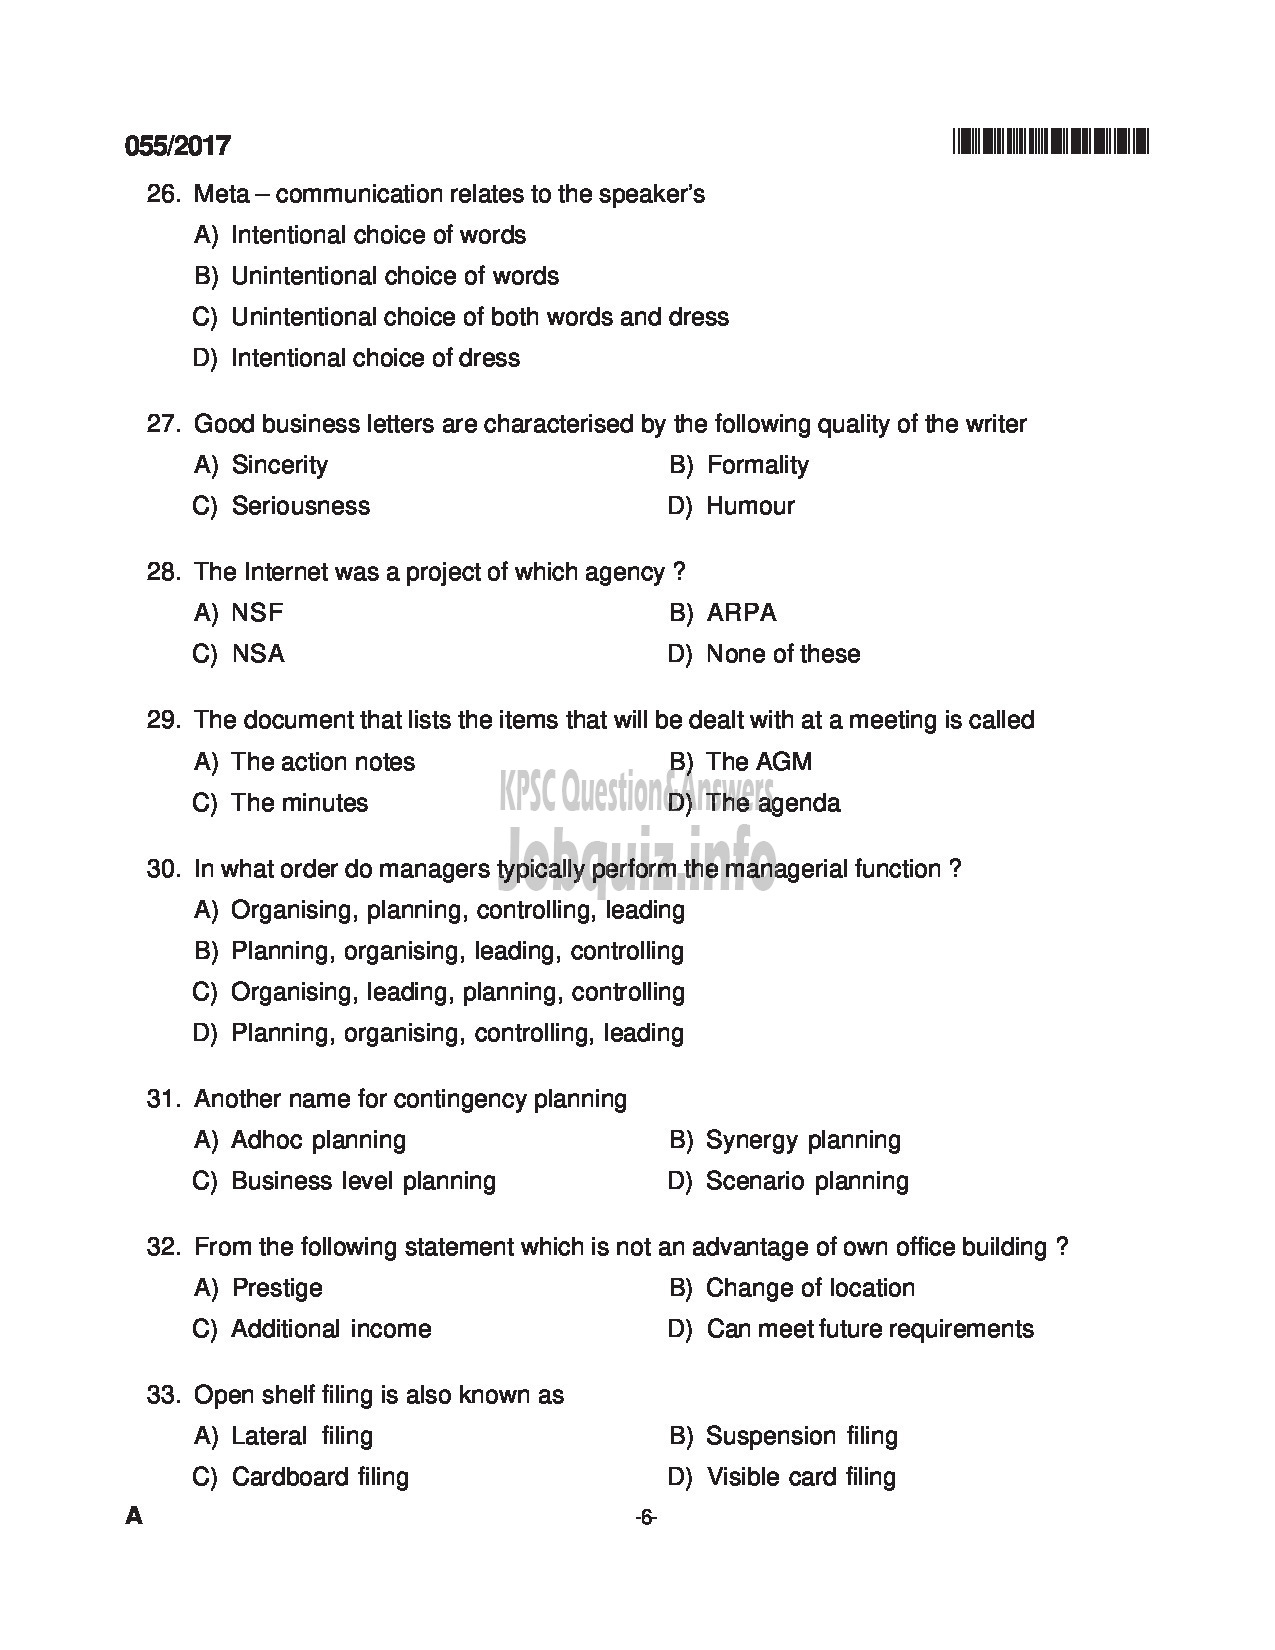 Kerala PSC Question Paper - INSTRUCTOR IN SECRETARIAL PRACTICE AND BM TECHNICAL EDUCATION QUESTION PAPER-6